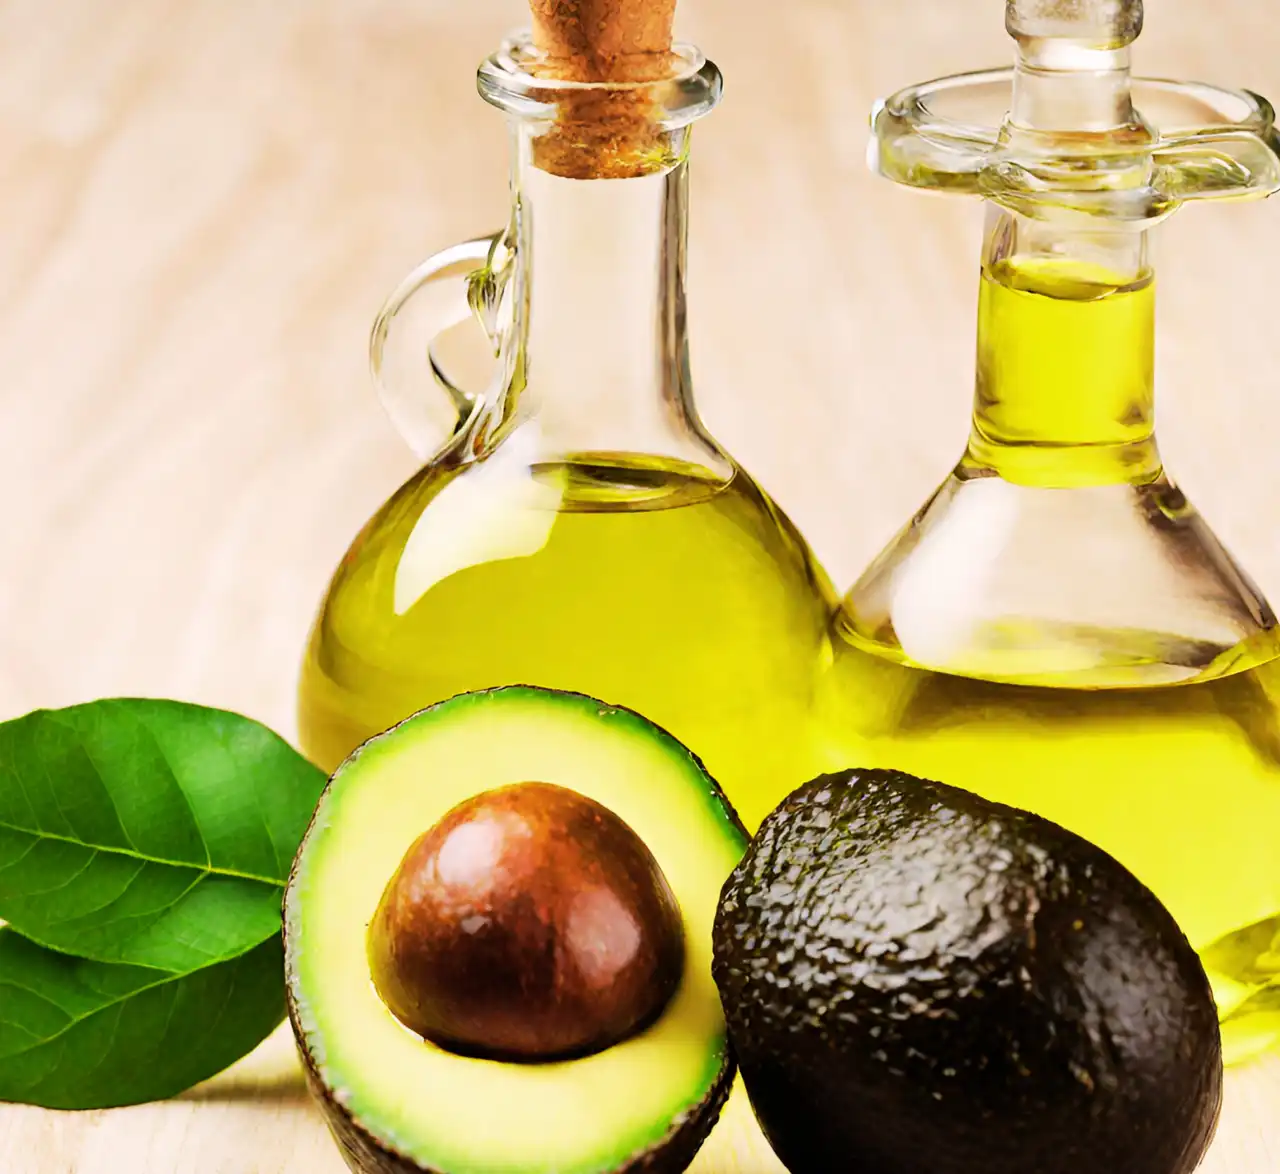 Fruittal.com | Can Avocado Oil be Used for Baking?